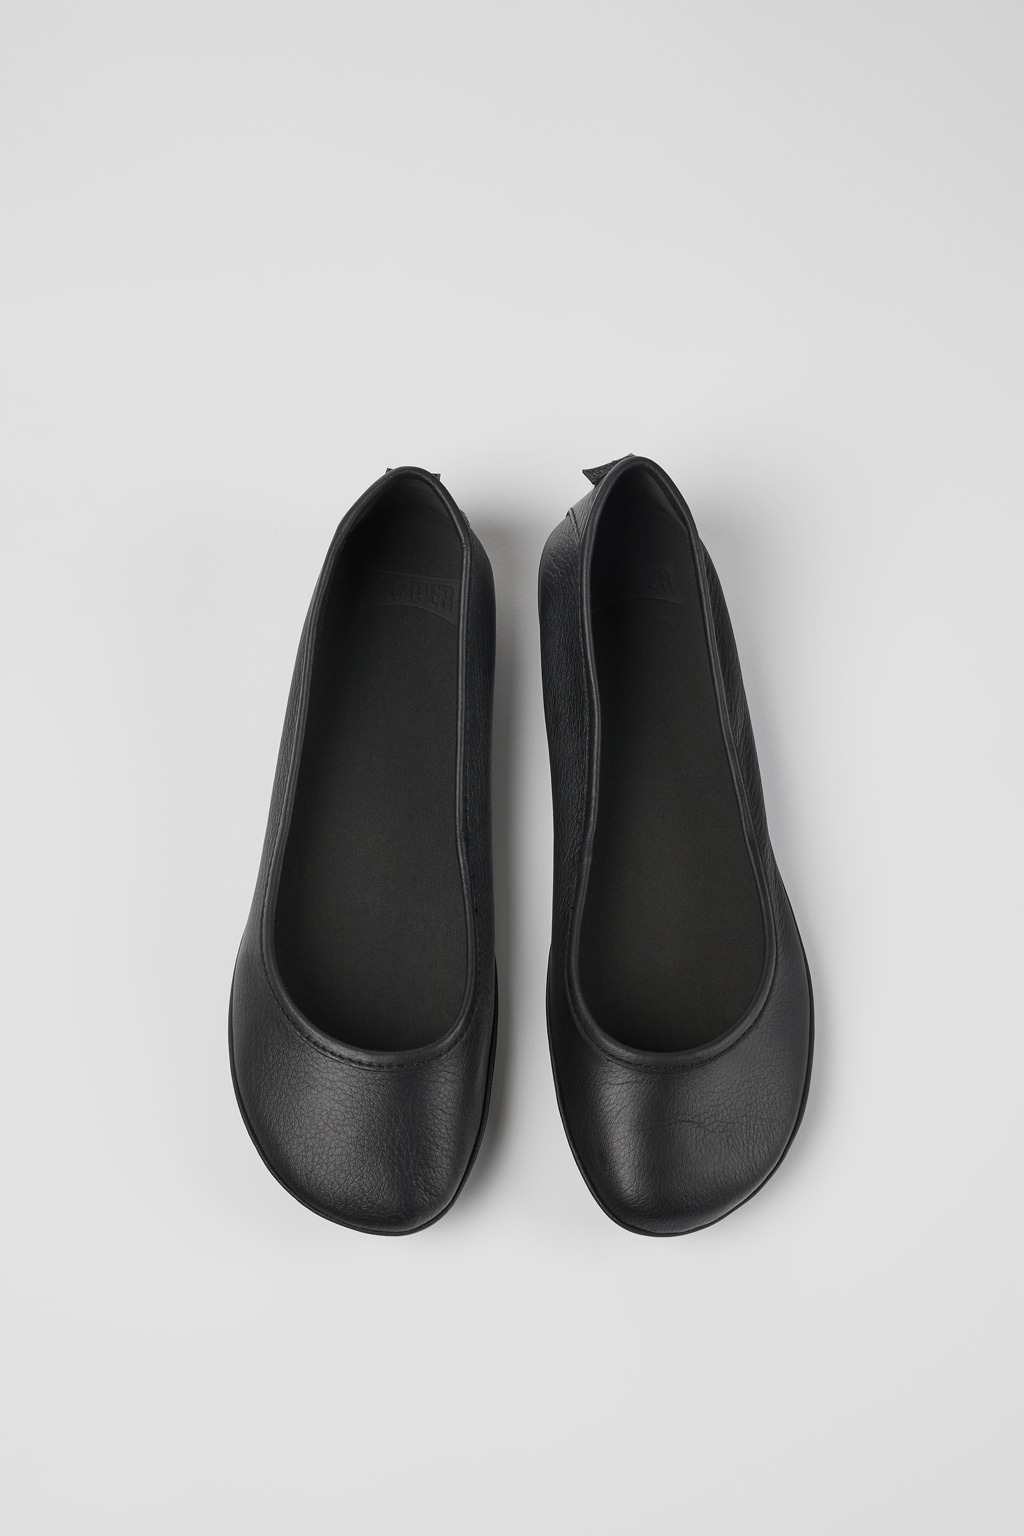 Right Black Ballerinas for Women - Fall/Winter collection - Camper 